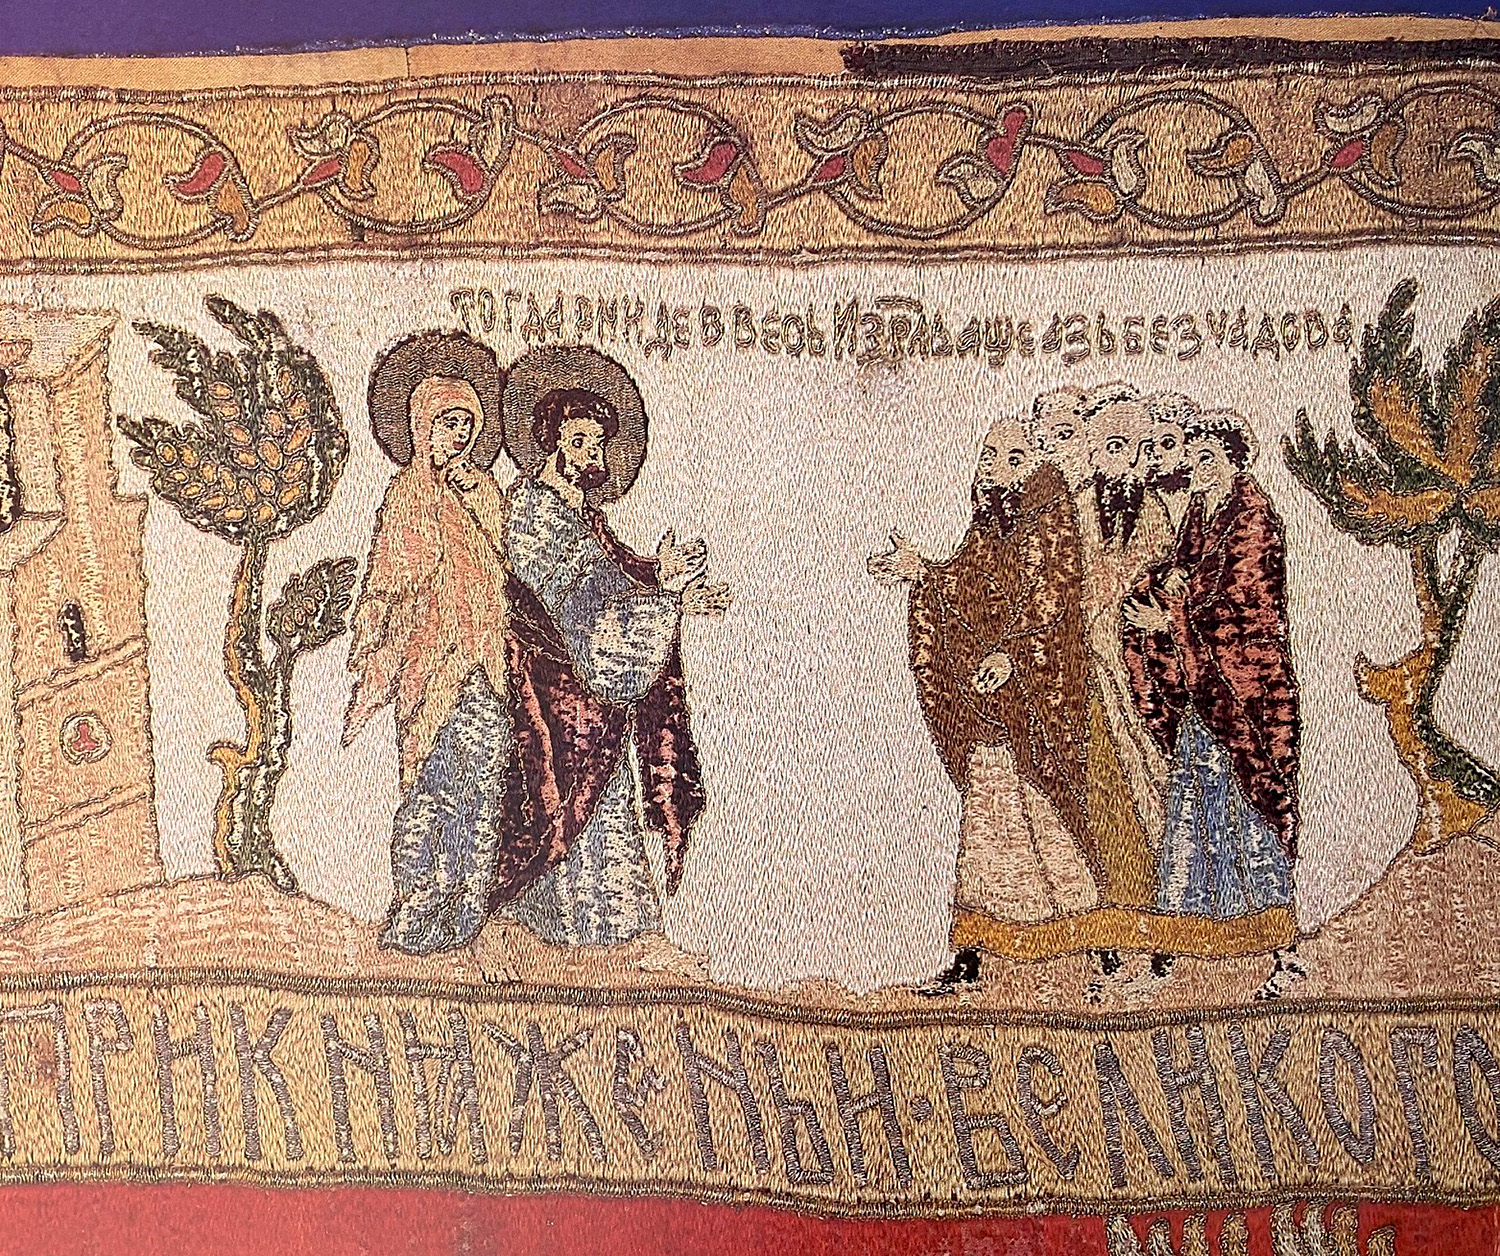 In a detail of an embroidered veil, a woman and a man with his hands held out before him face a group of five men, all between two trees.